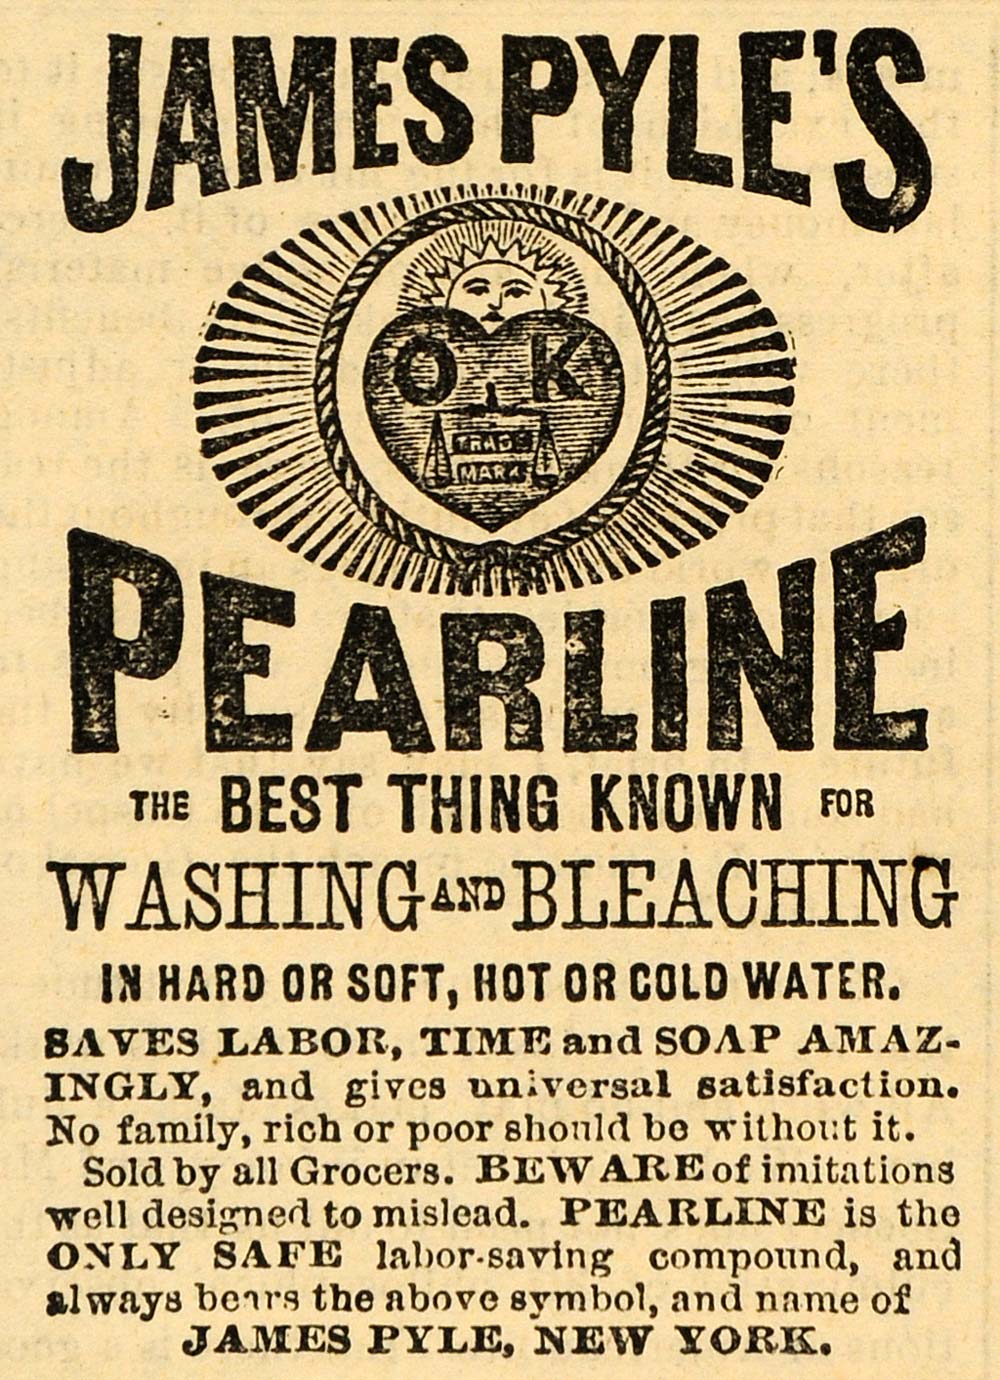 1882 Ad James Pyle's Pearline Soap Washing Detergent - ORIGINAL ADVERTISING TIN6